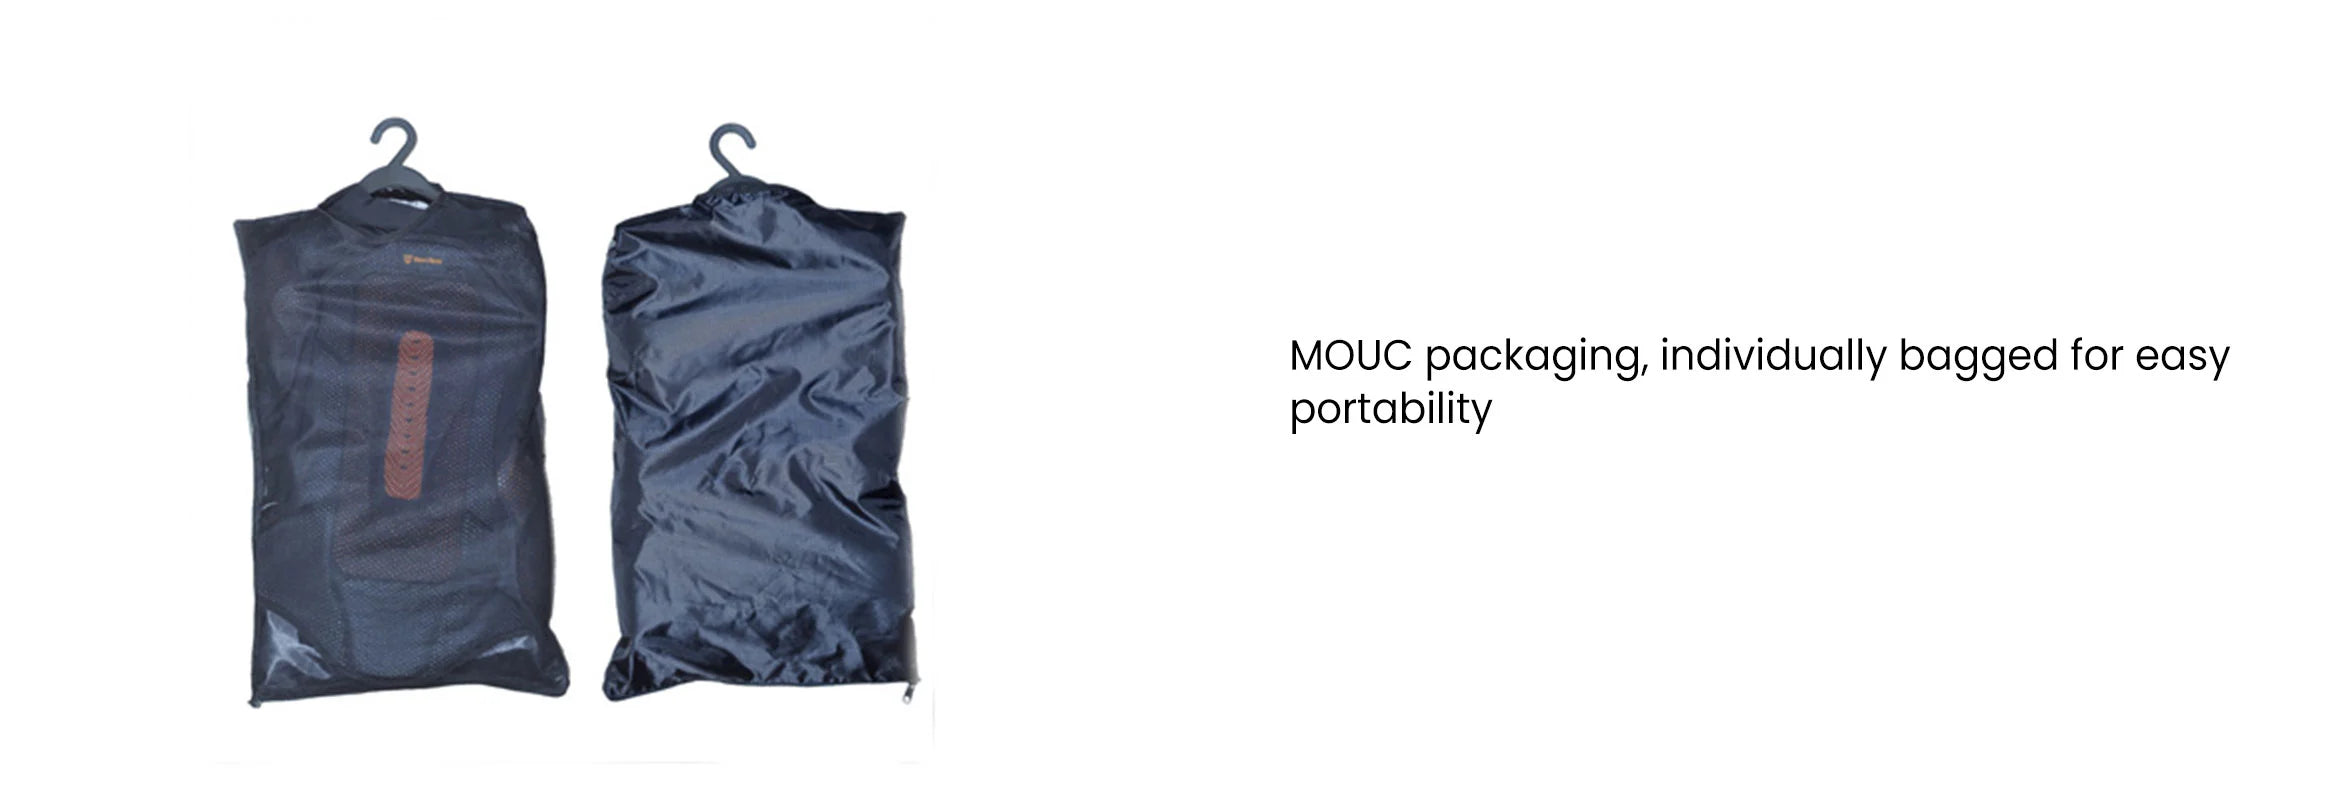 11. Doorek ski protector armor - MOUC packaging individually bagged for easy portability